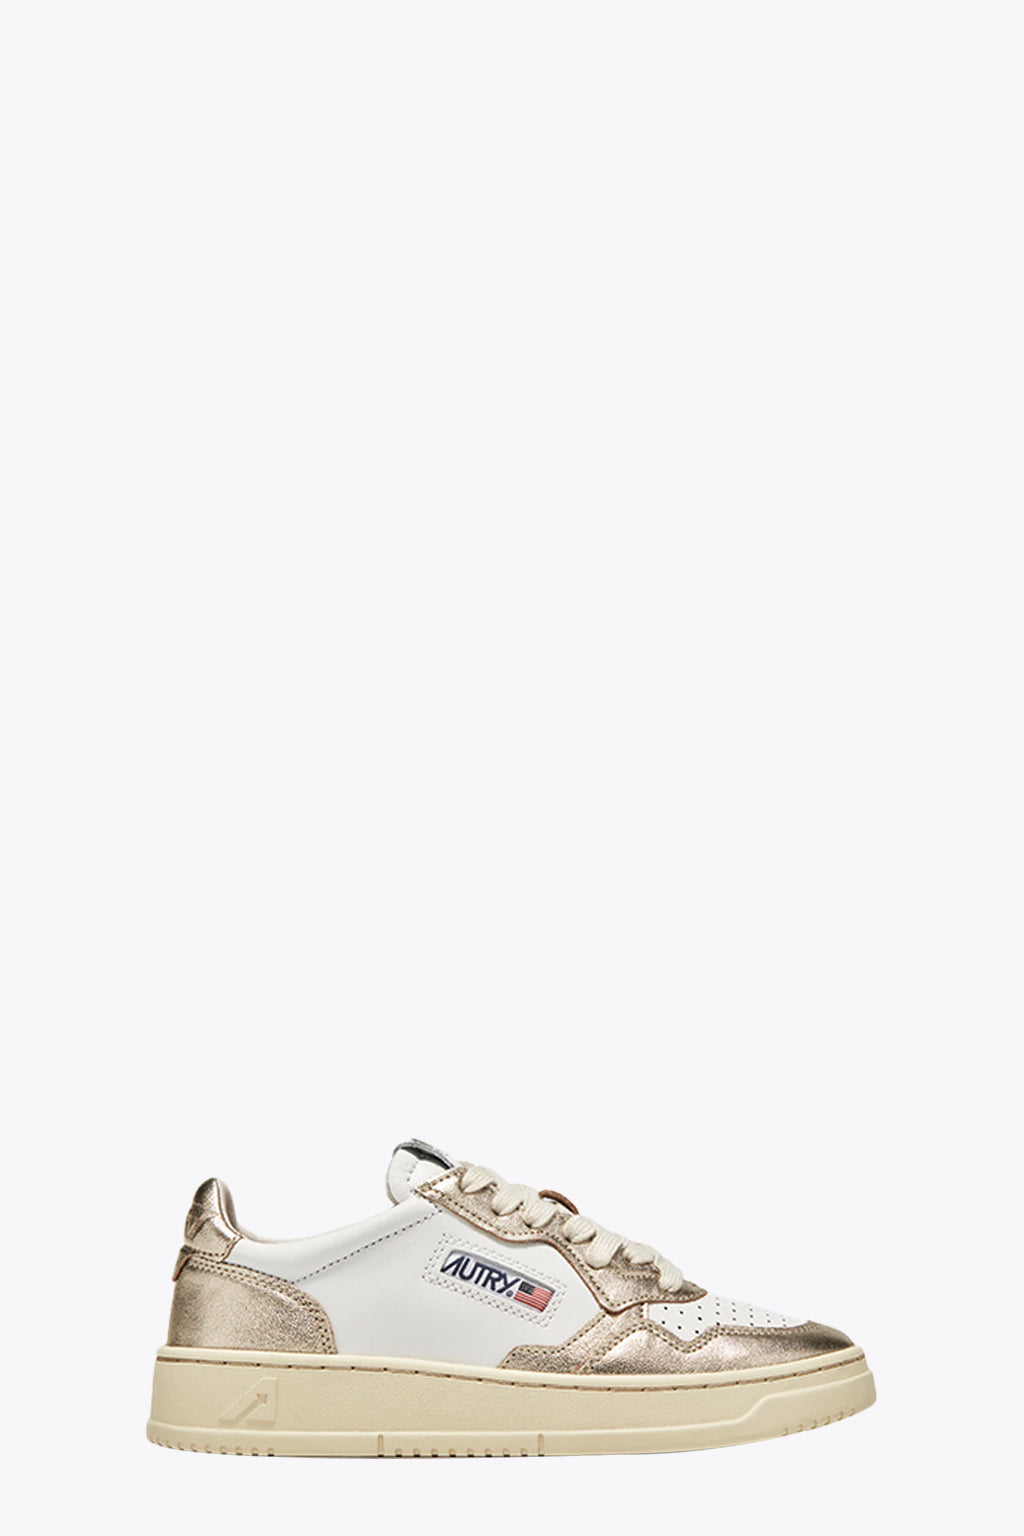 alt-image__Gold-and-white-leather-low-sneaker---Medalist